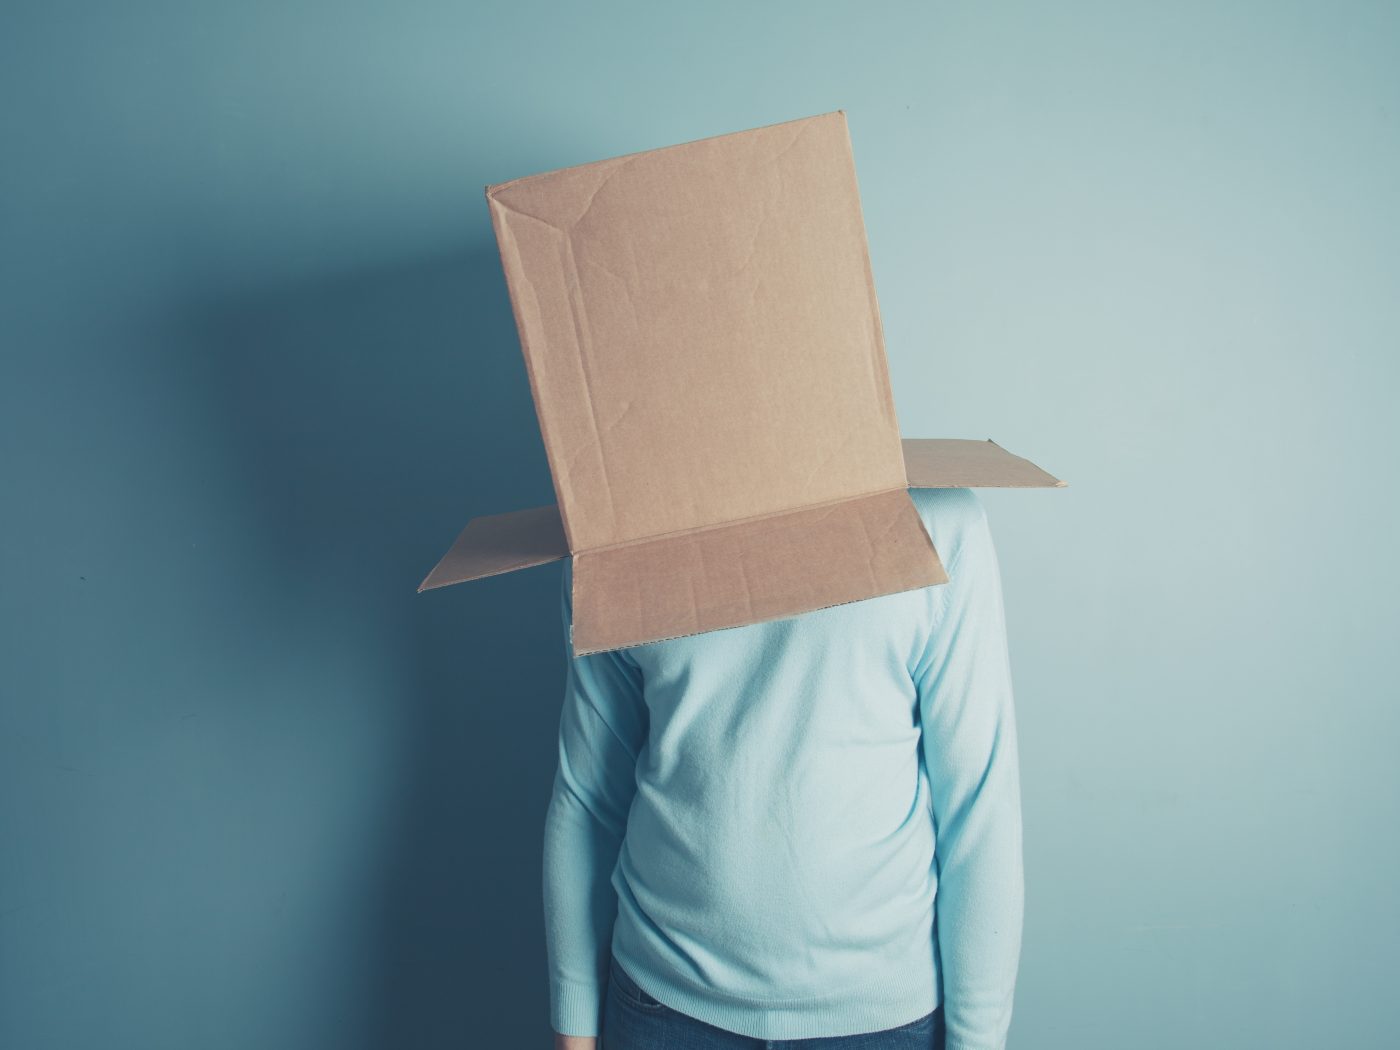 A man is standing with a cardboard box over his head